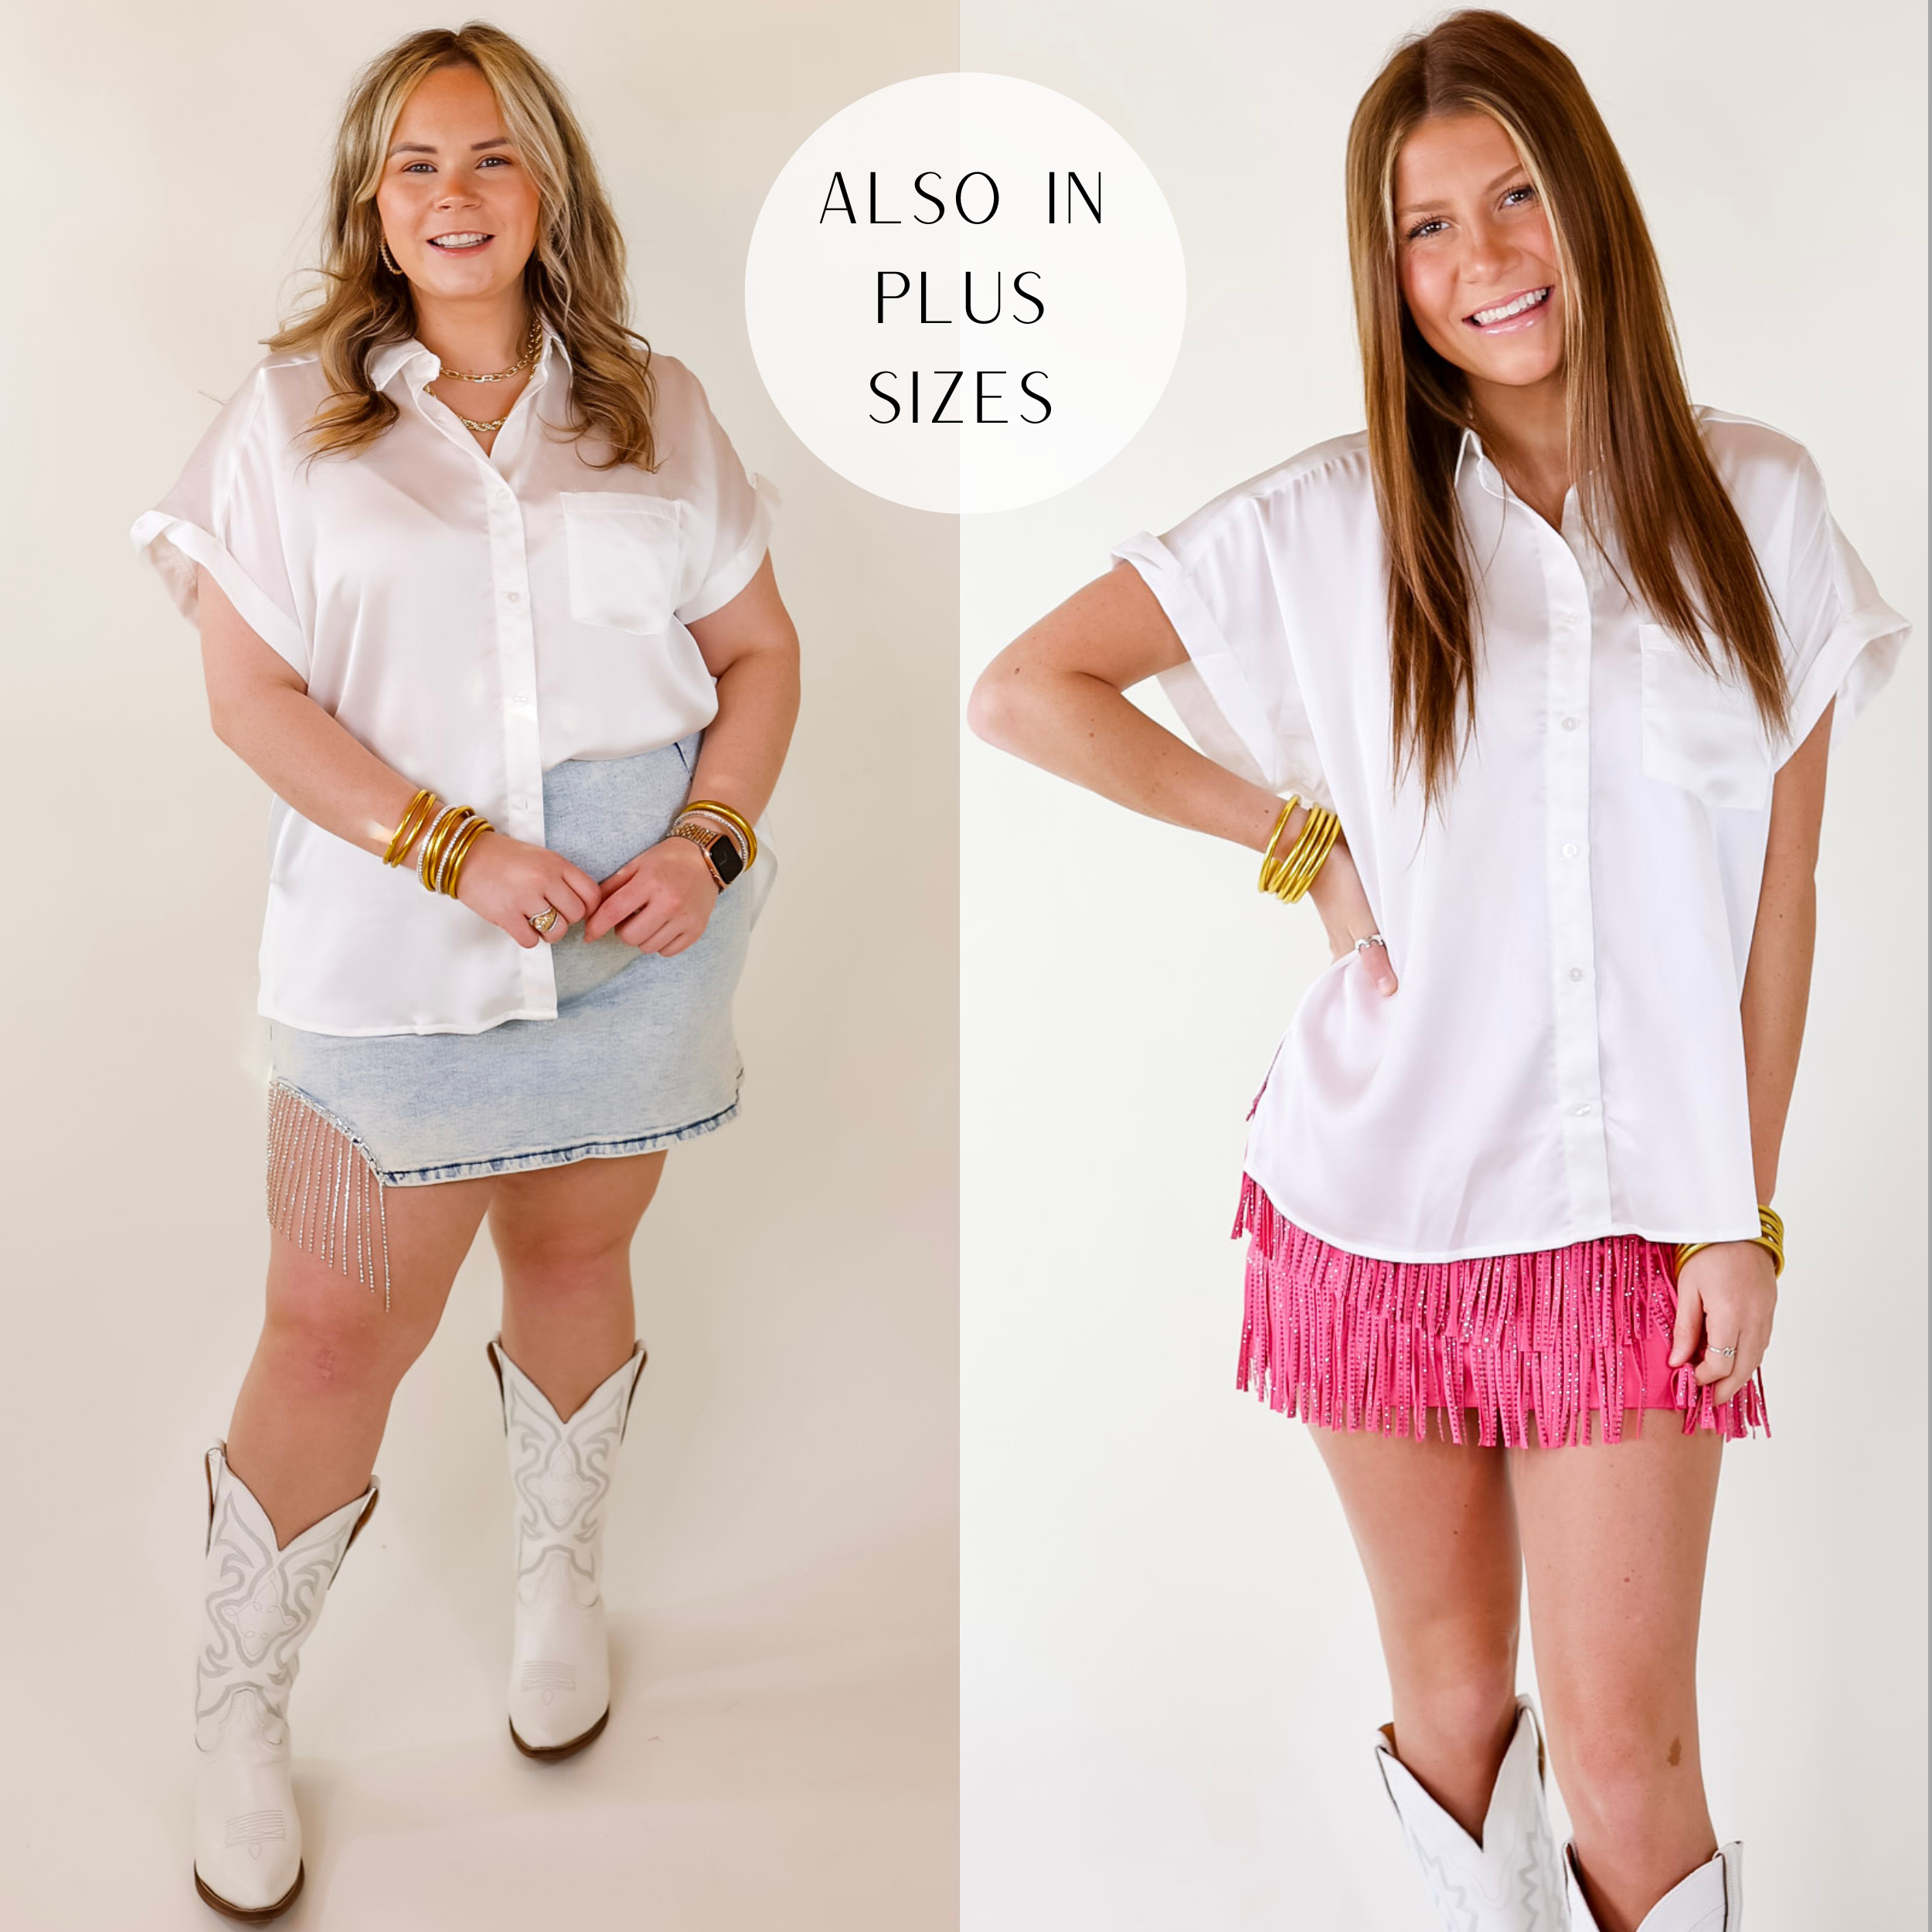 Model is wearing a button down collared short sleeve shirt in white with a white background.